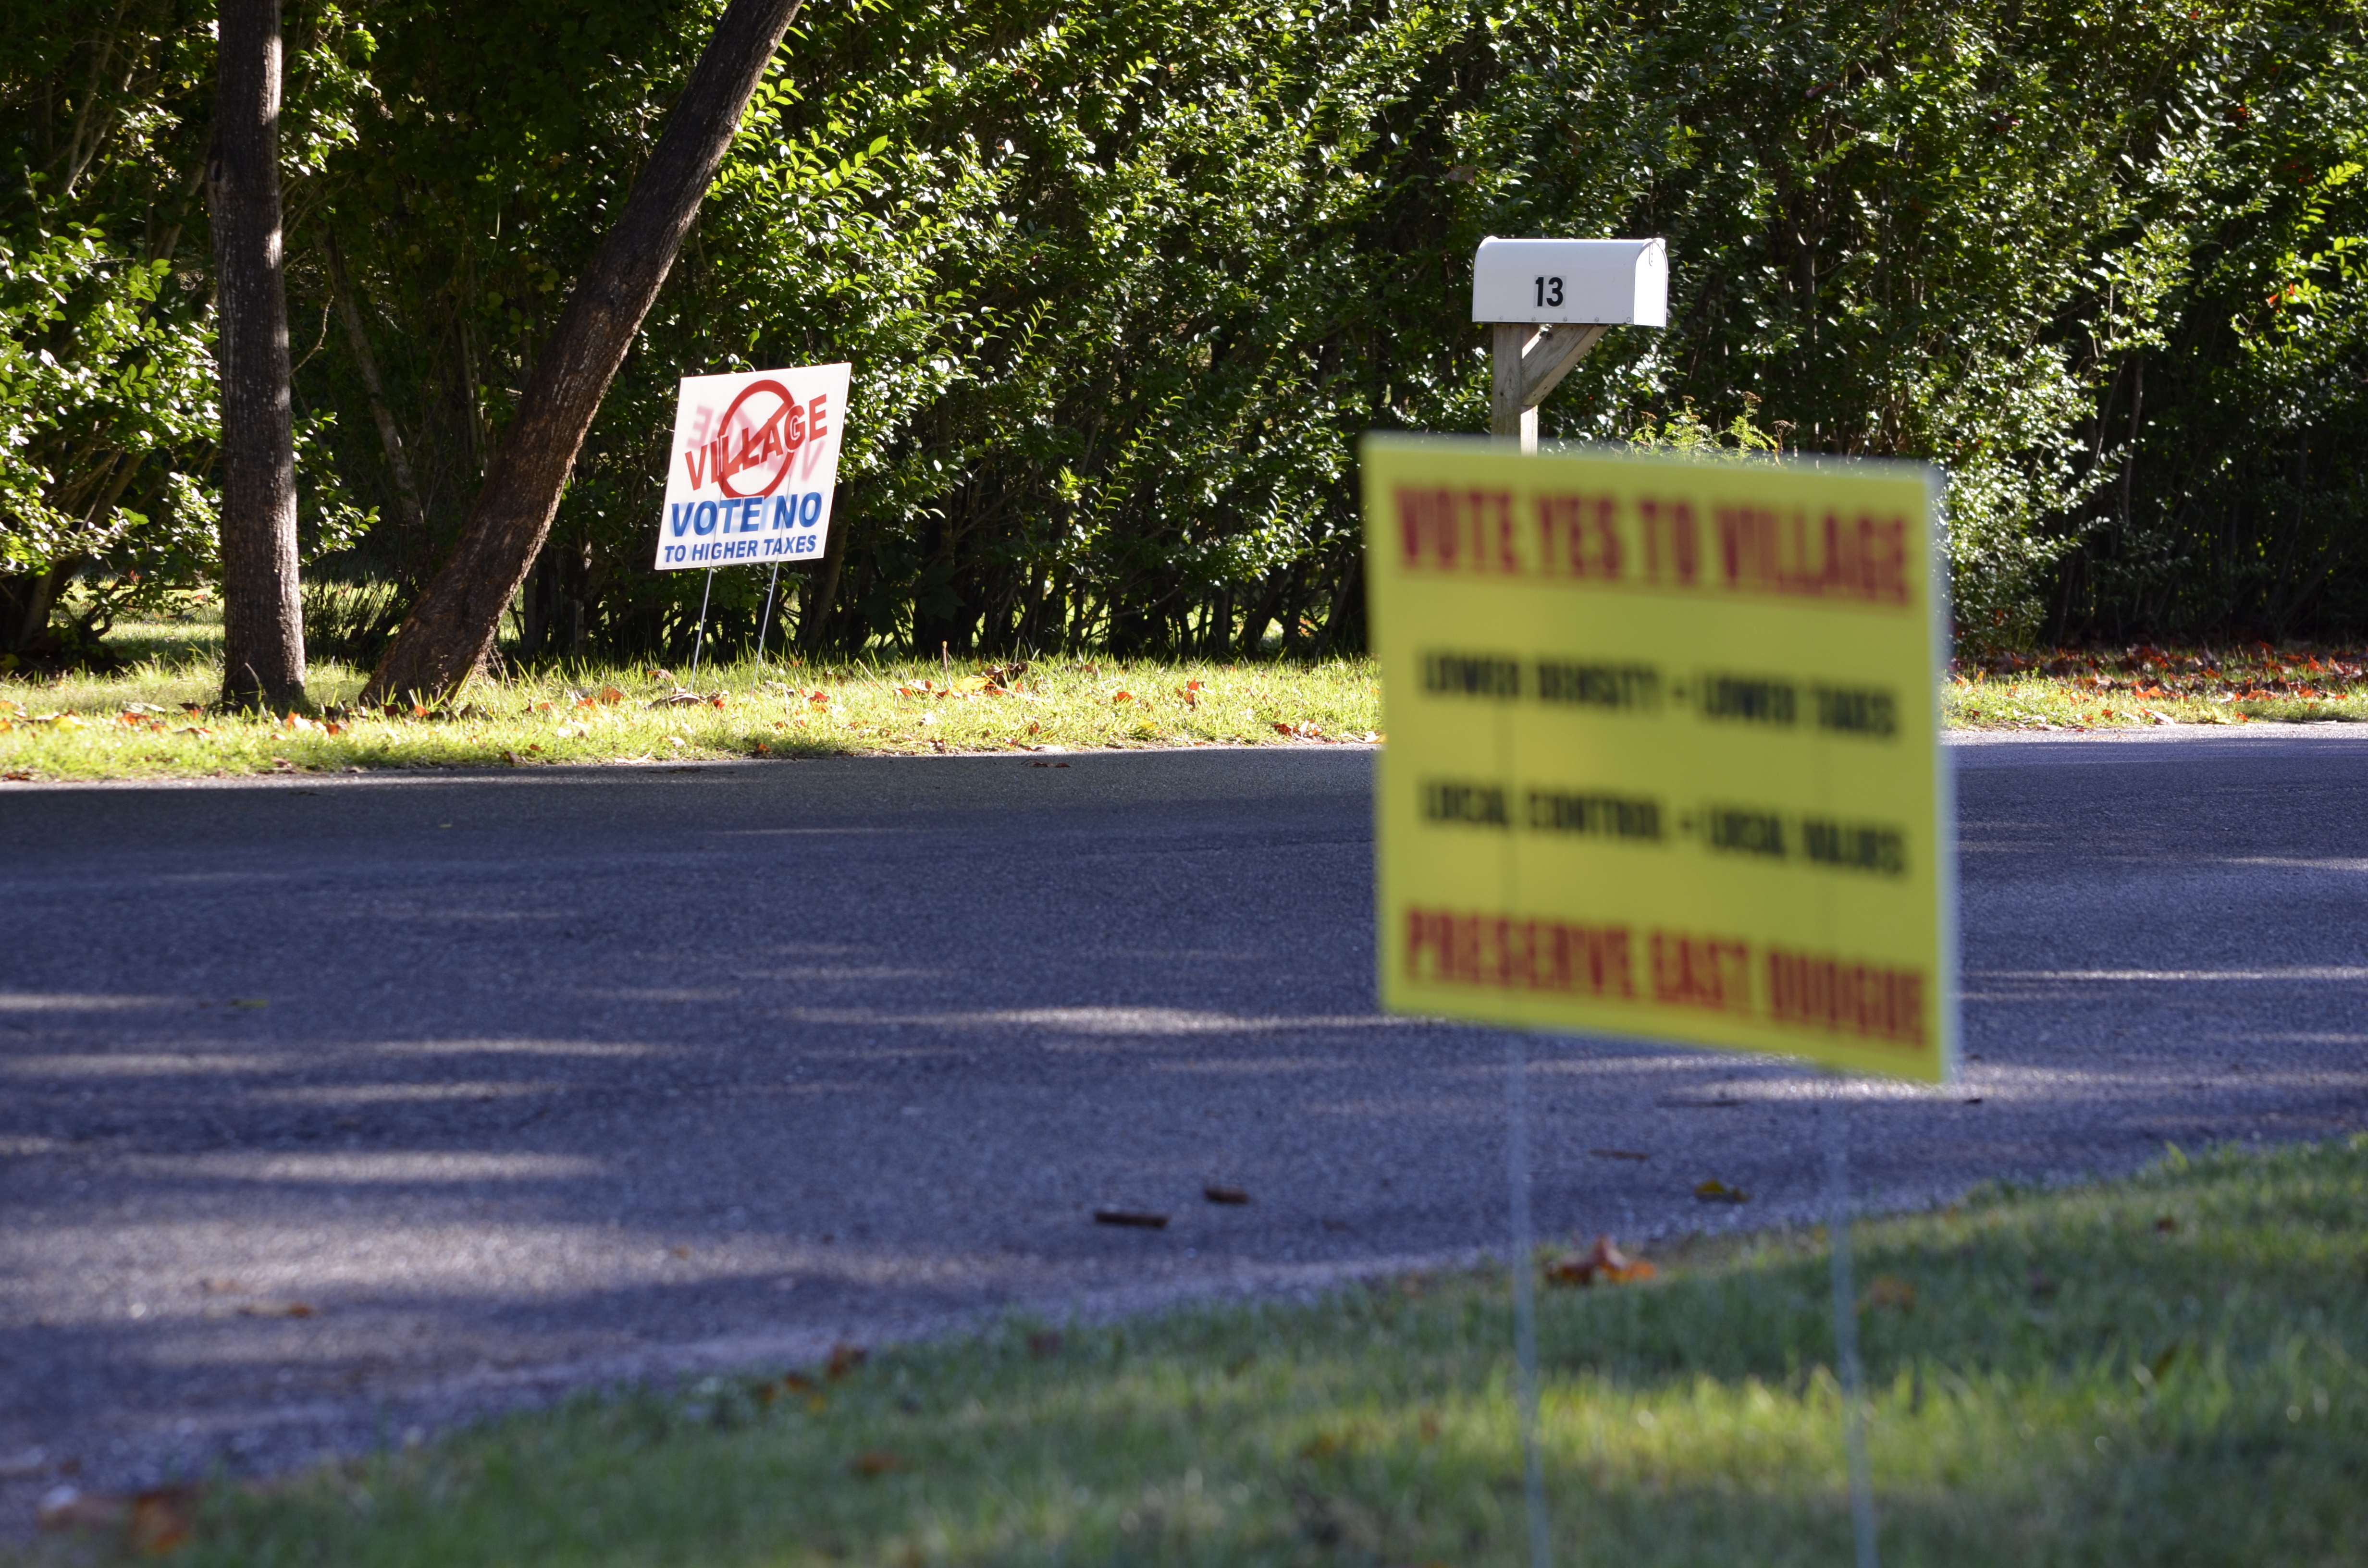 Signs for and against the East Quogue village incorporation are posted across the street from each other. ANISAH ABDULLAH